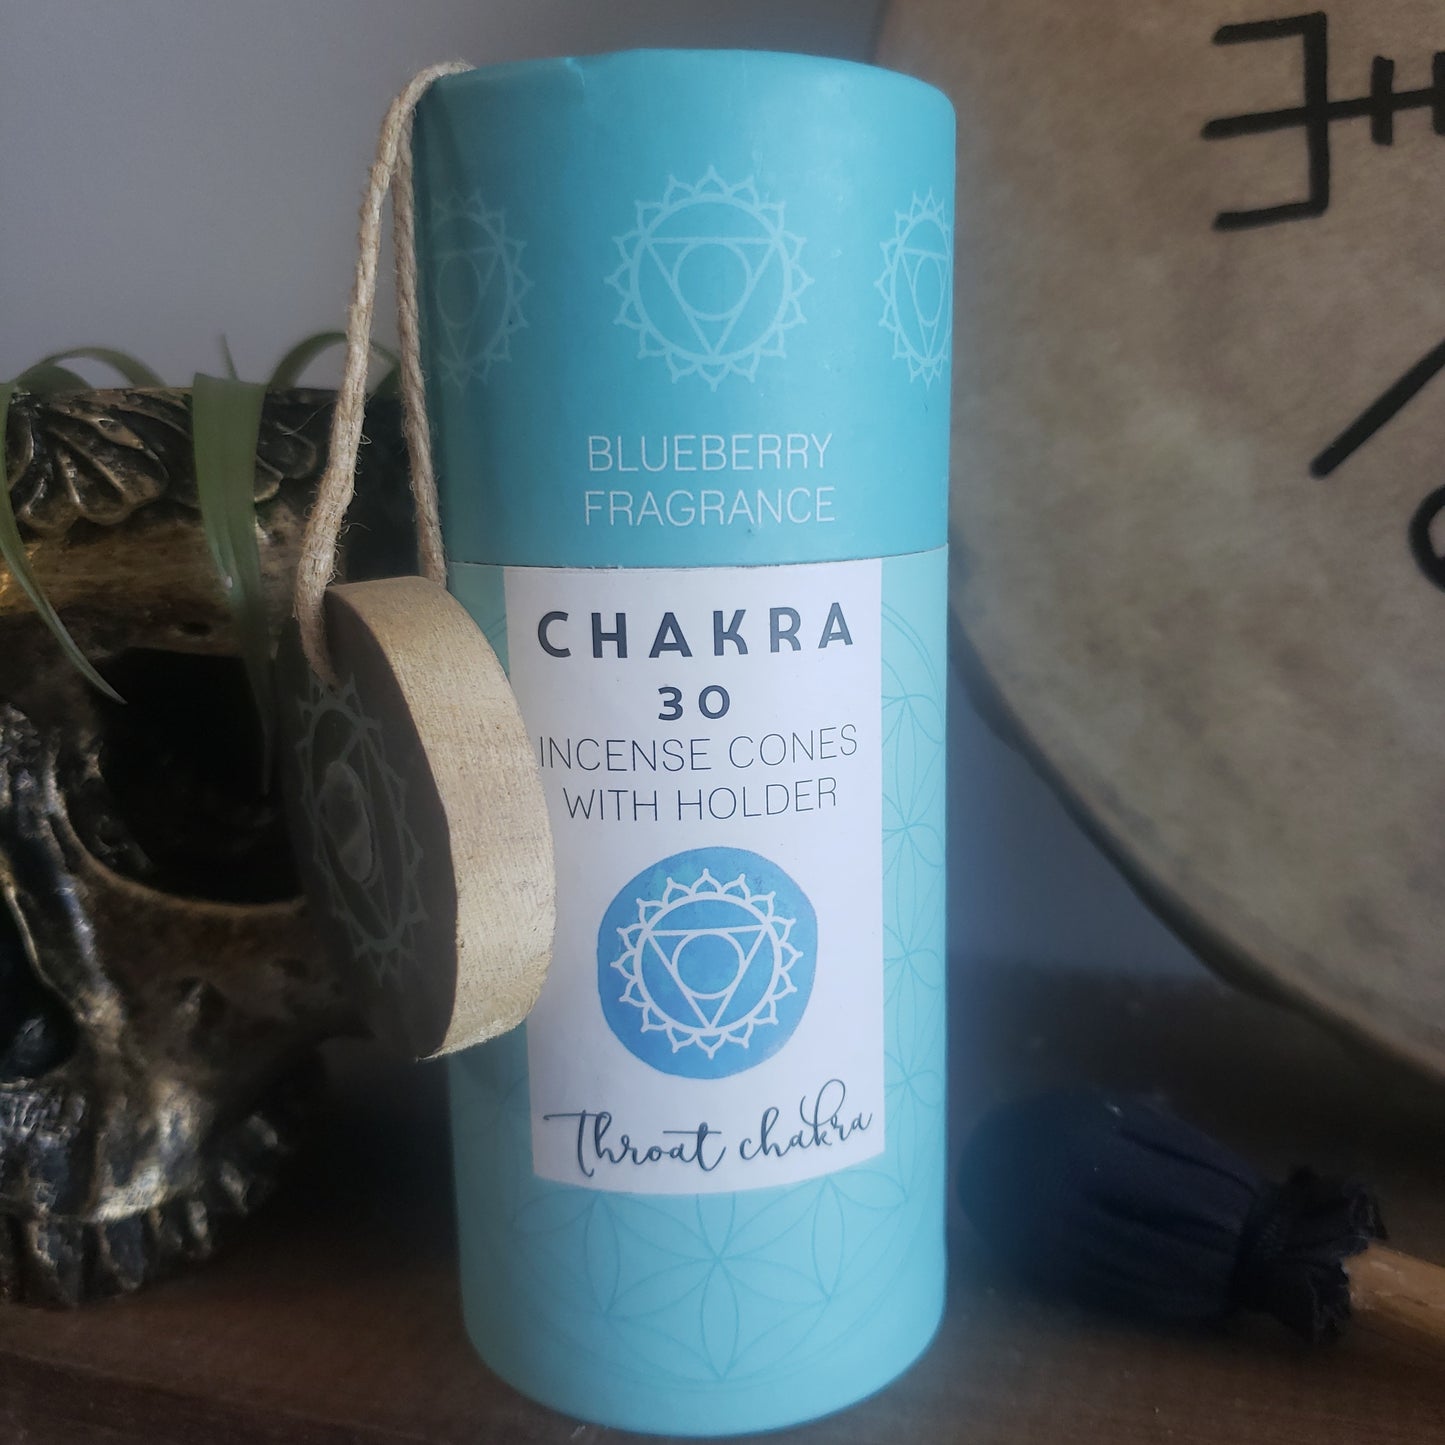 CHAKRA Incense Cones with Holder